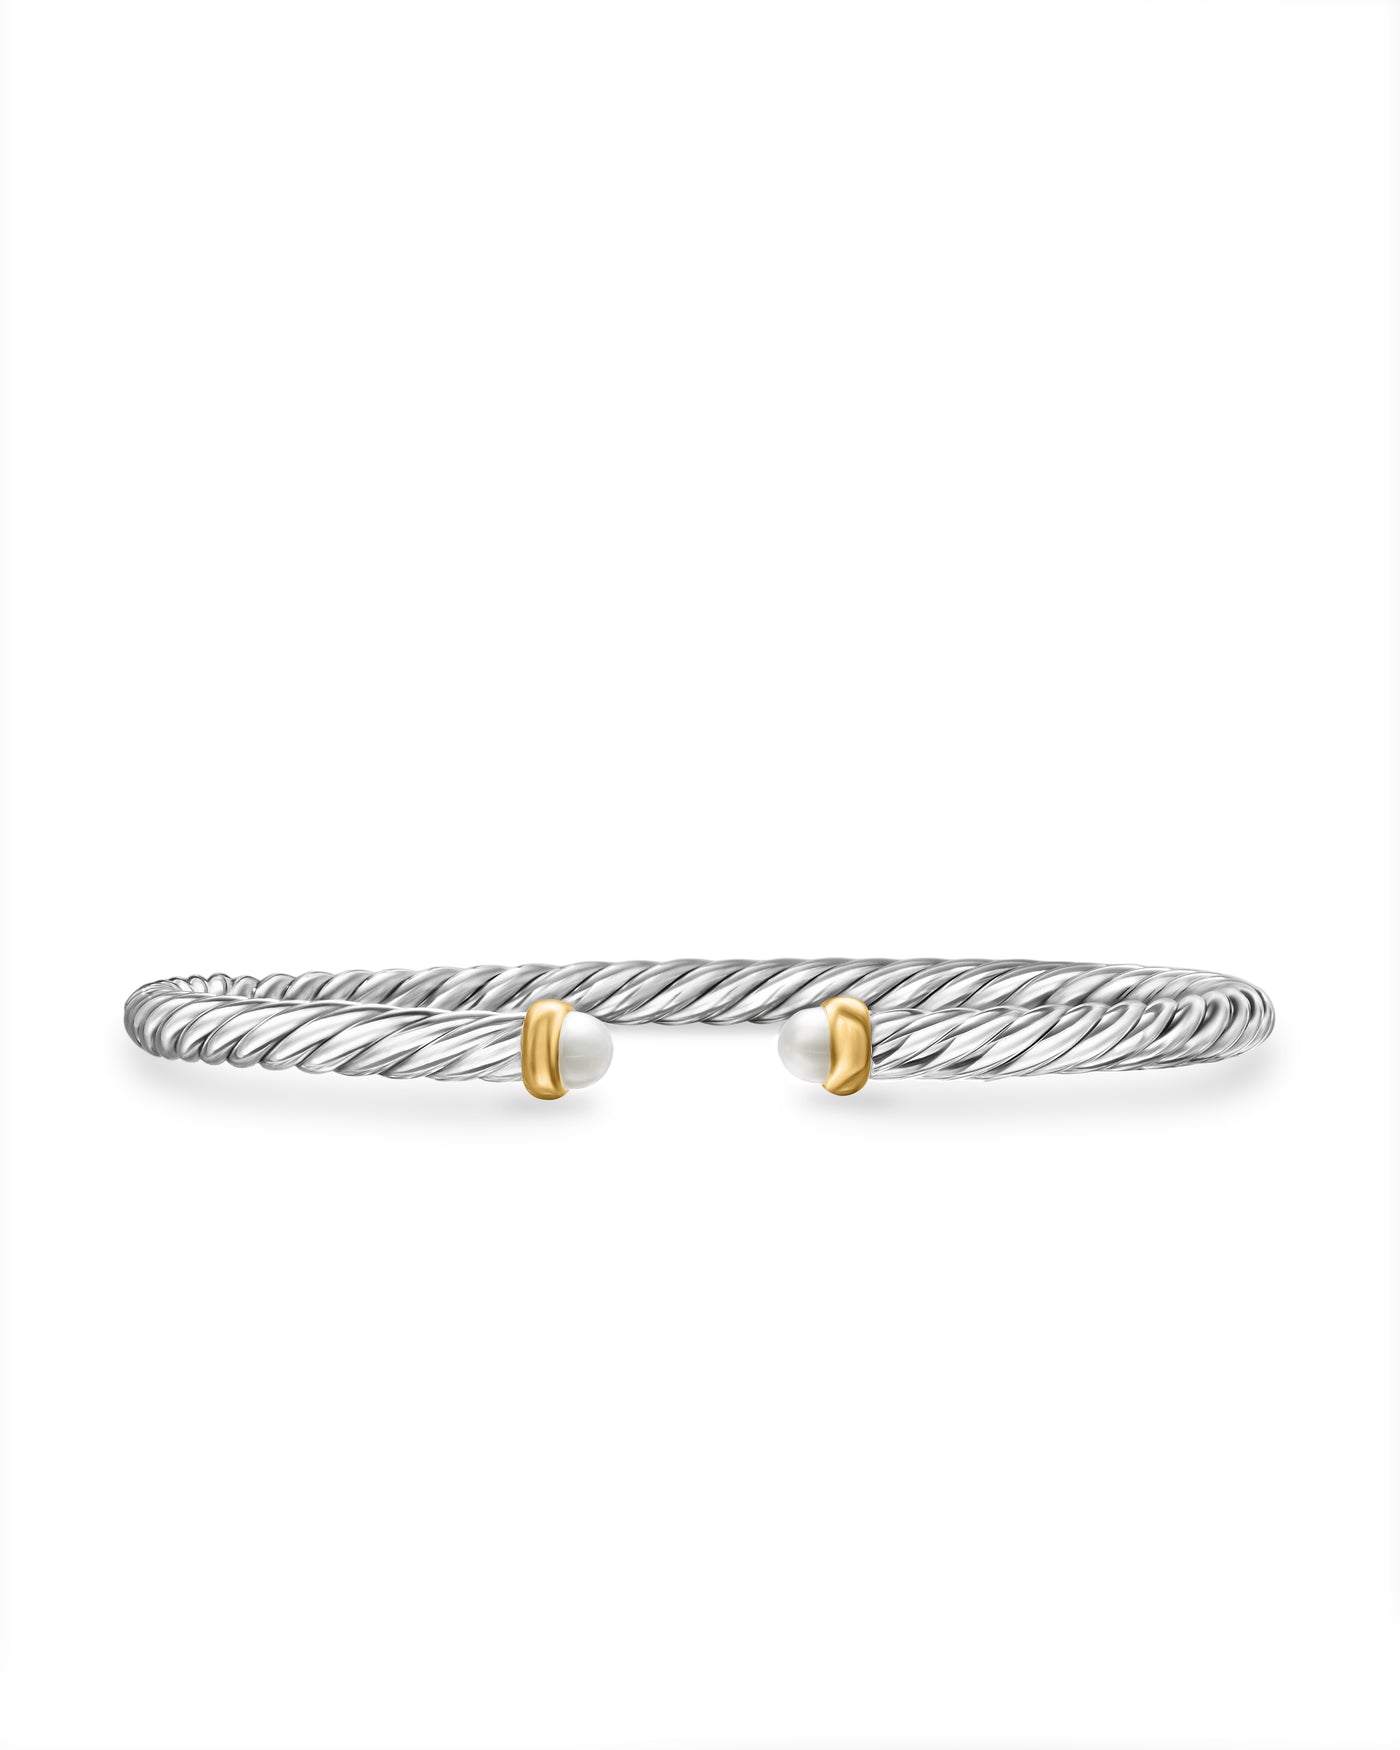 Modern Cable Bracelet in Sterling Silver with 14K Yellow Gold and Pearls\, 4mm